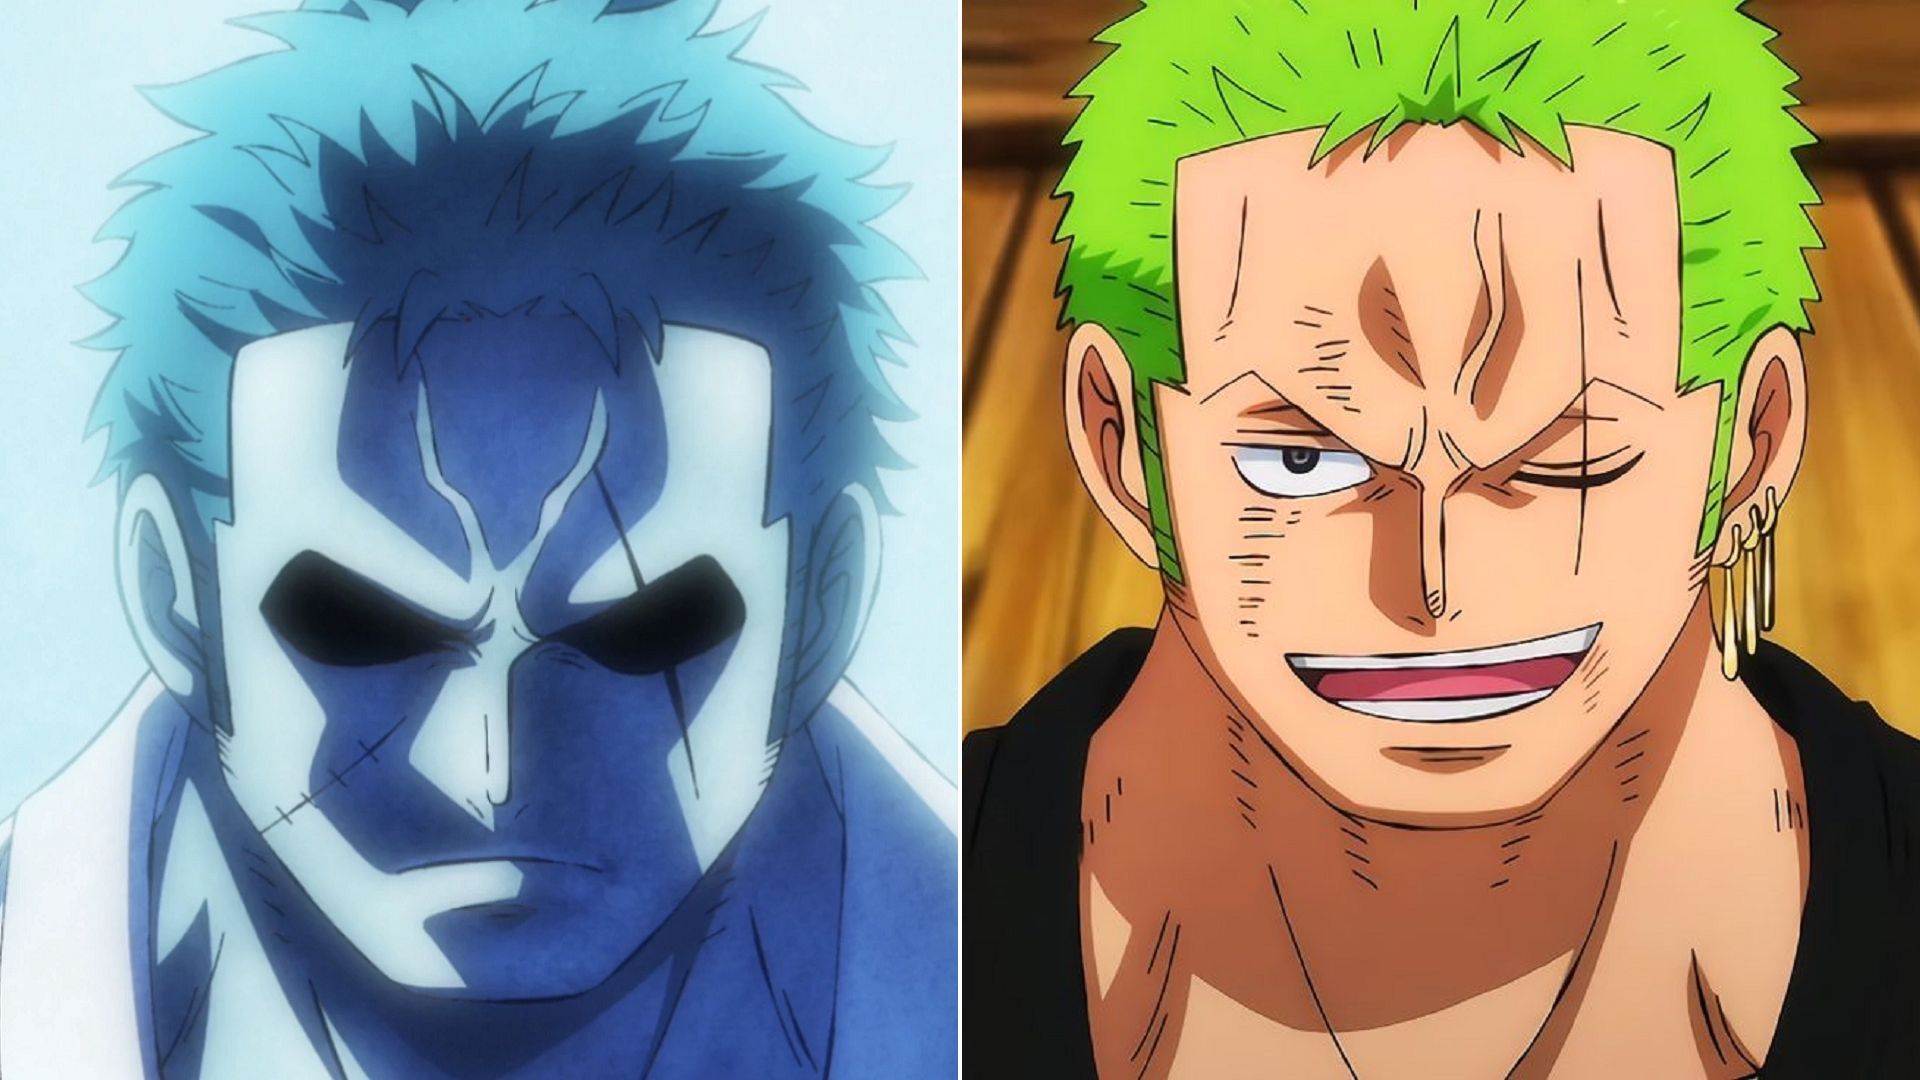 The resemblance between Ryuma and Zoro is unreal (Image via Toei Animation)